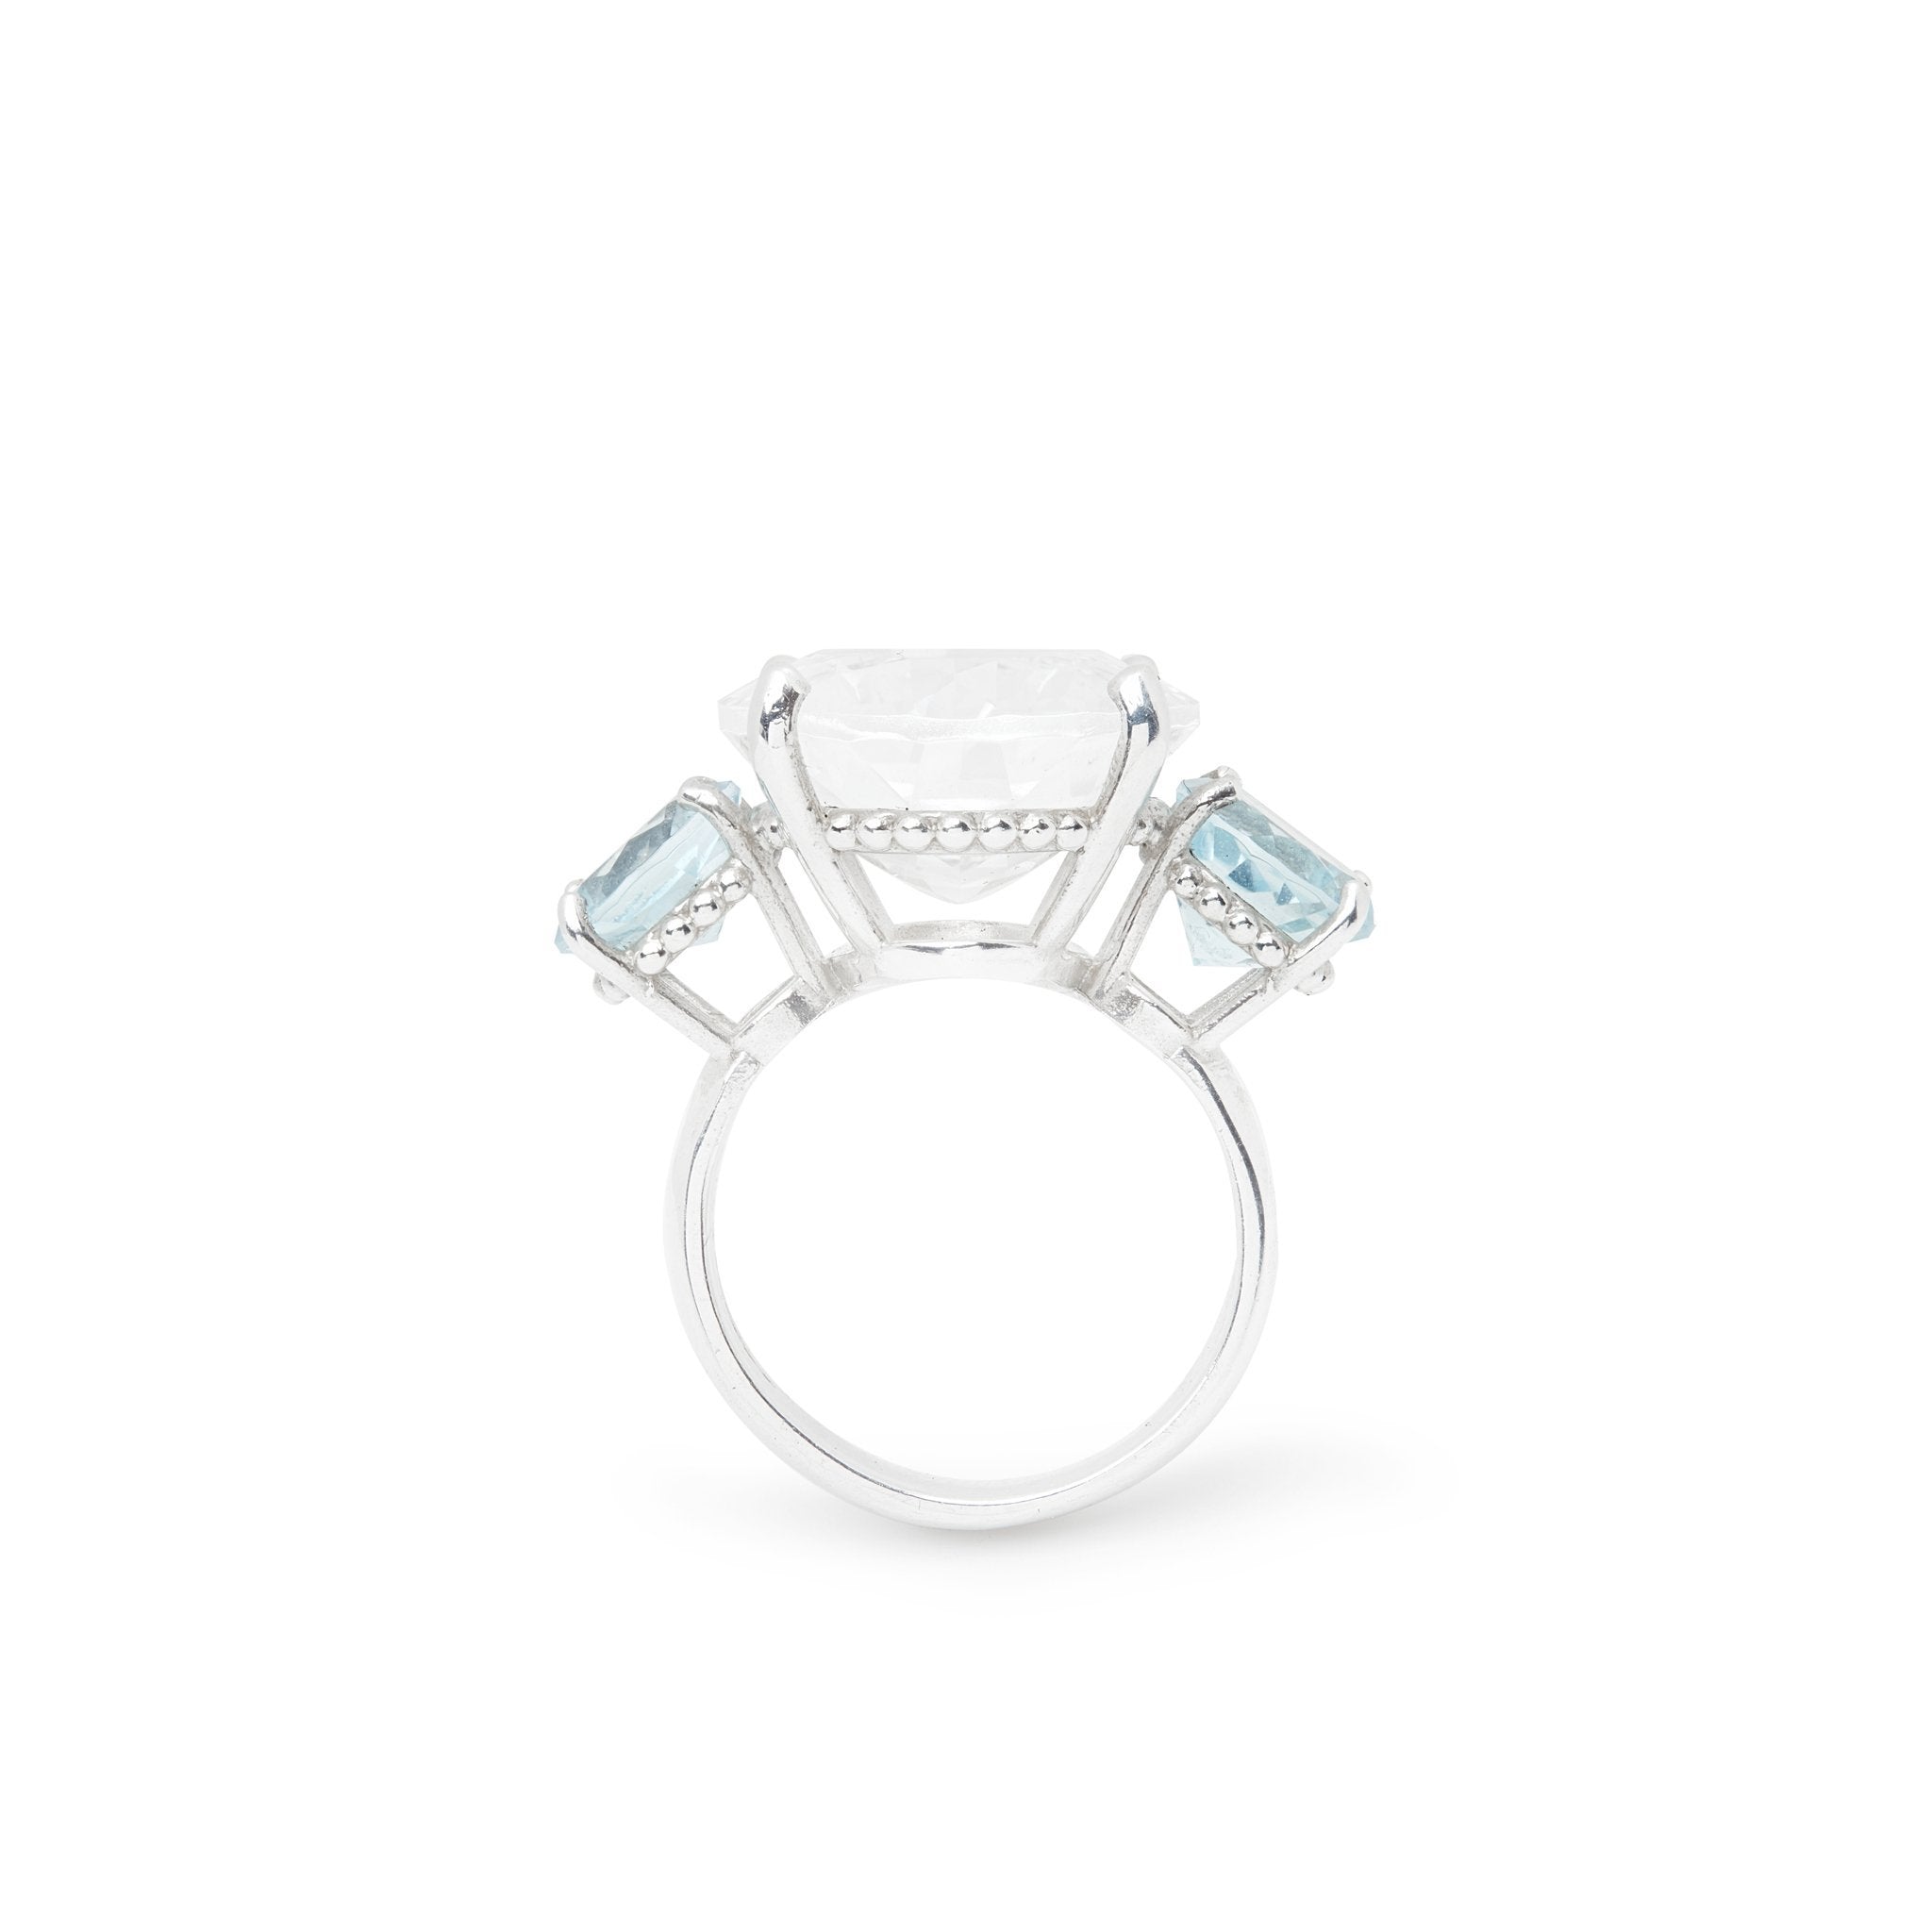 The Renaissance Statement Ring in Crystal Quartz and Blue Topaz - Christelle Chamberland